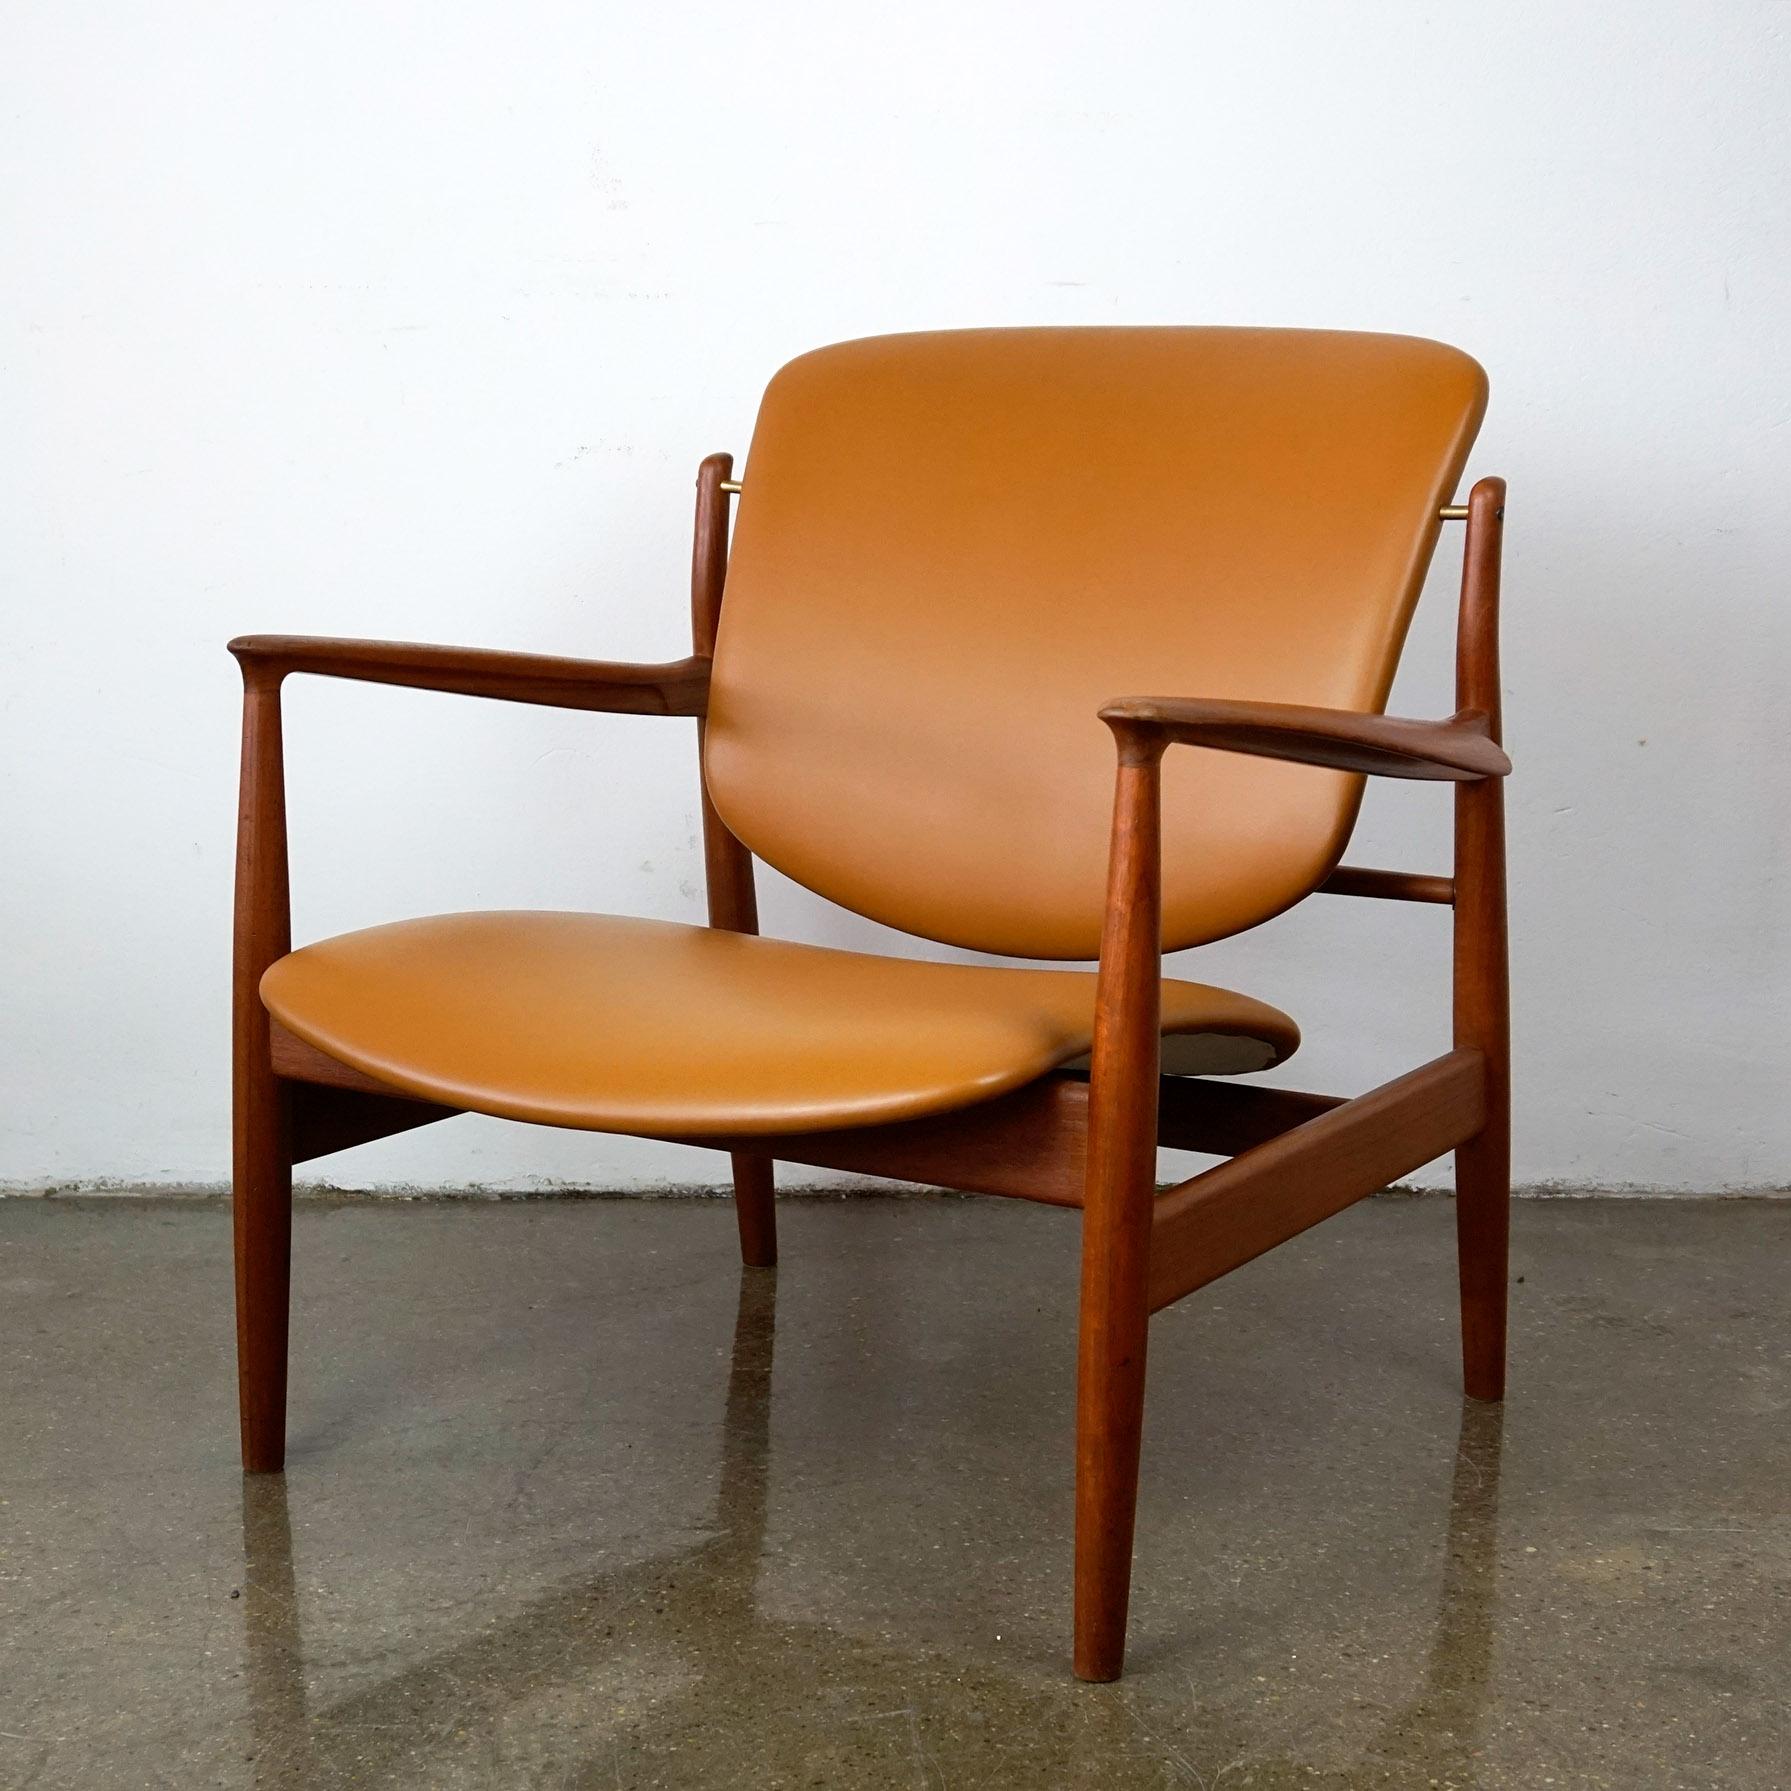 Excellent and comfortable scandinavian Modern Lounge chair model number FD 136 designed by Finn Juhl for France & Son, Denmark. Curved backrest and and seat that appears to float. Wonderful organic shaped armrests and renewed top quality cognac